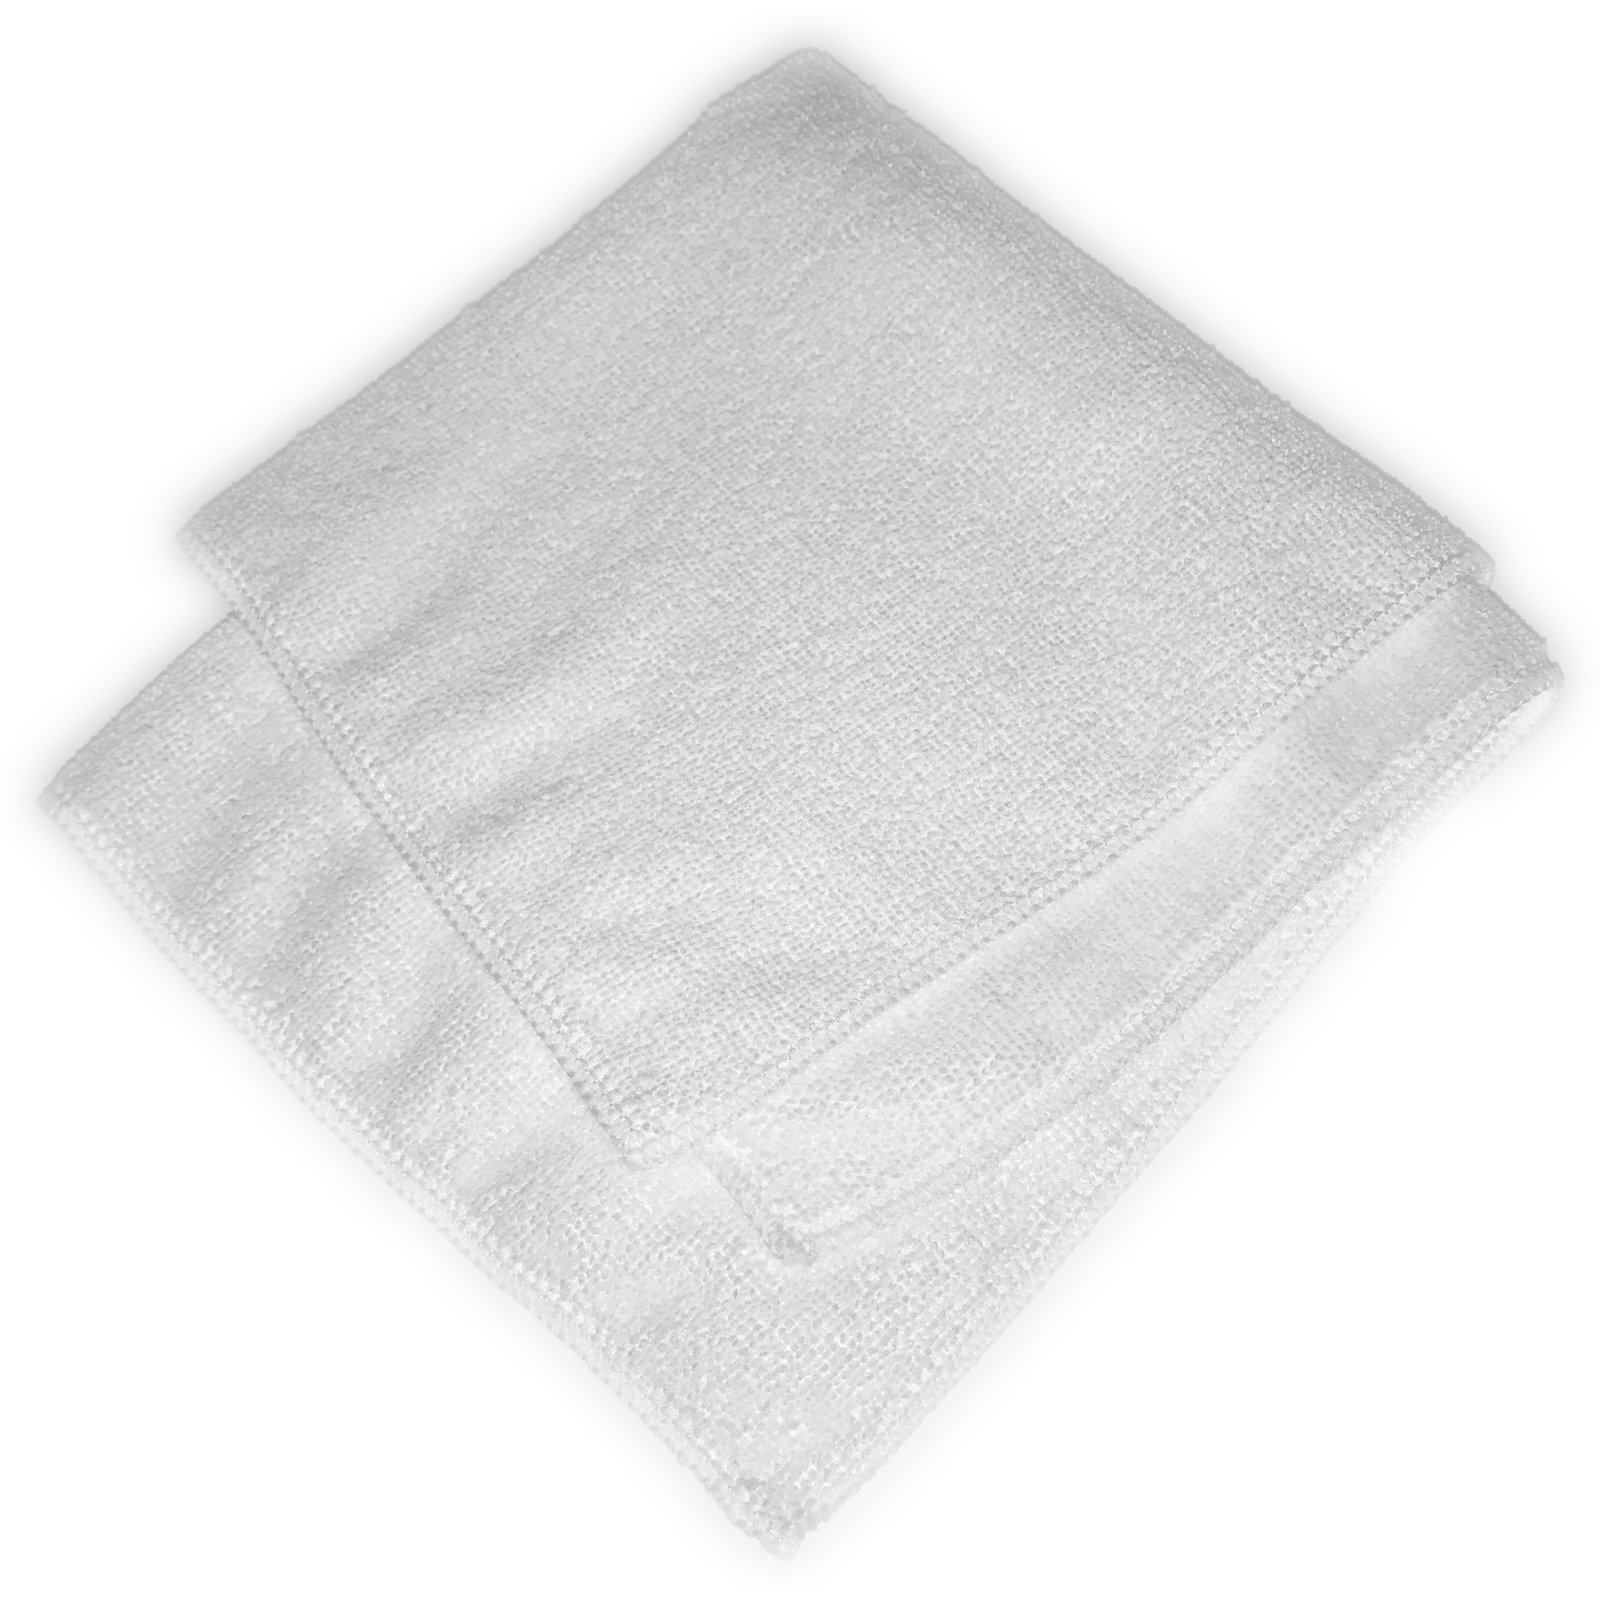 rPET Microfiber Terry Cloth for universal cleaning